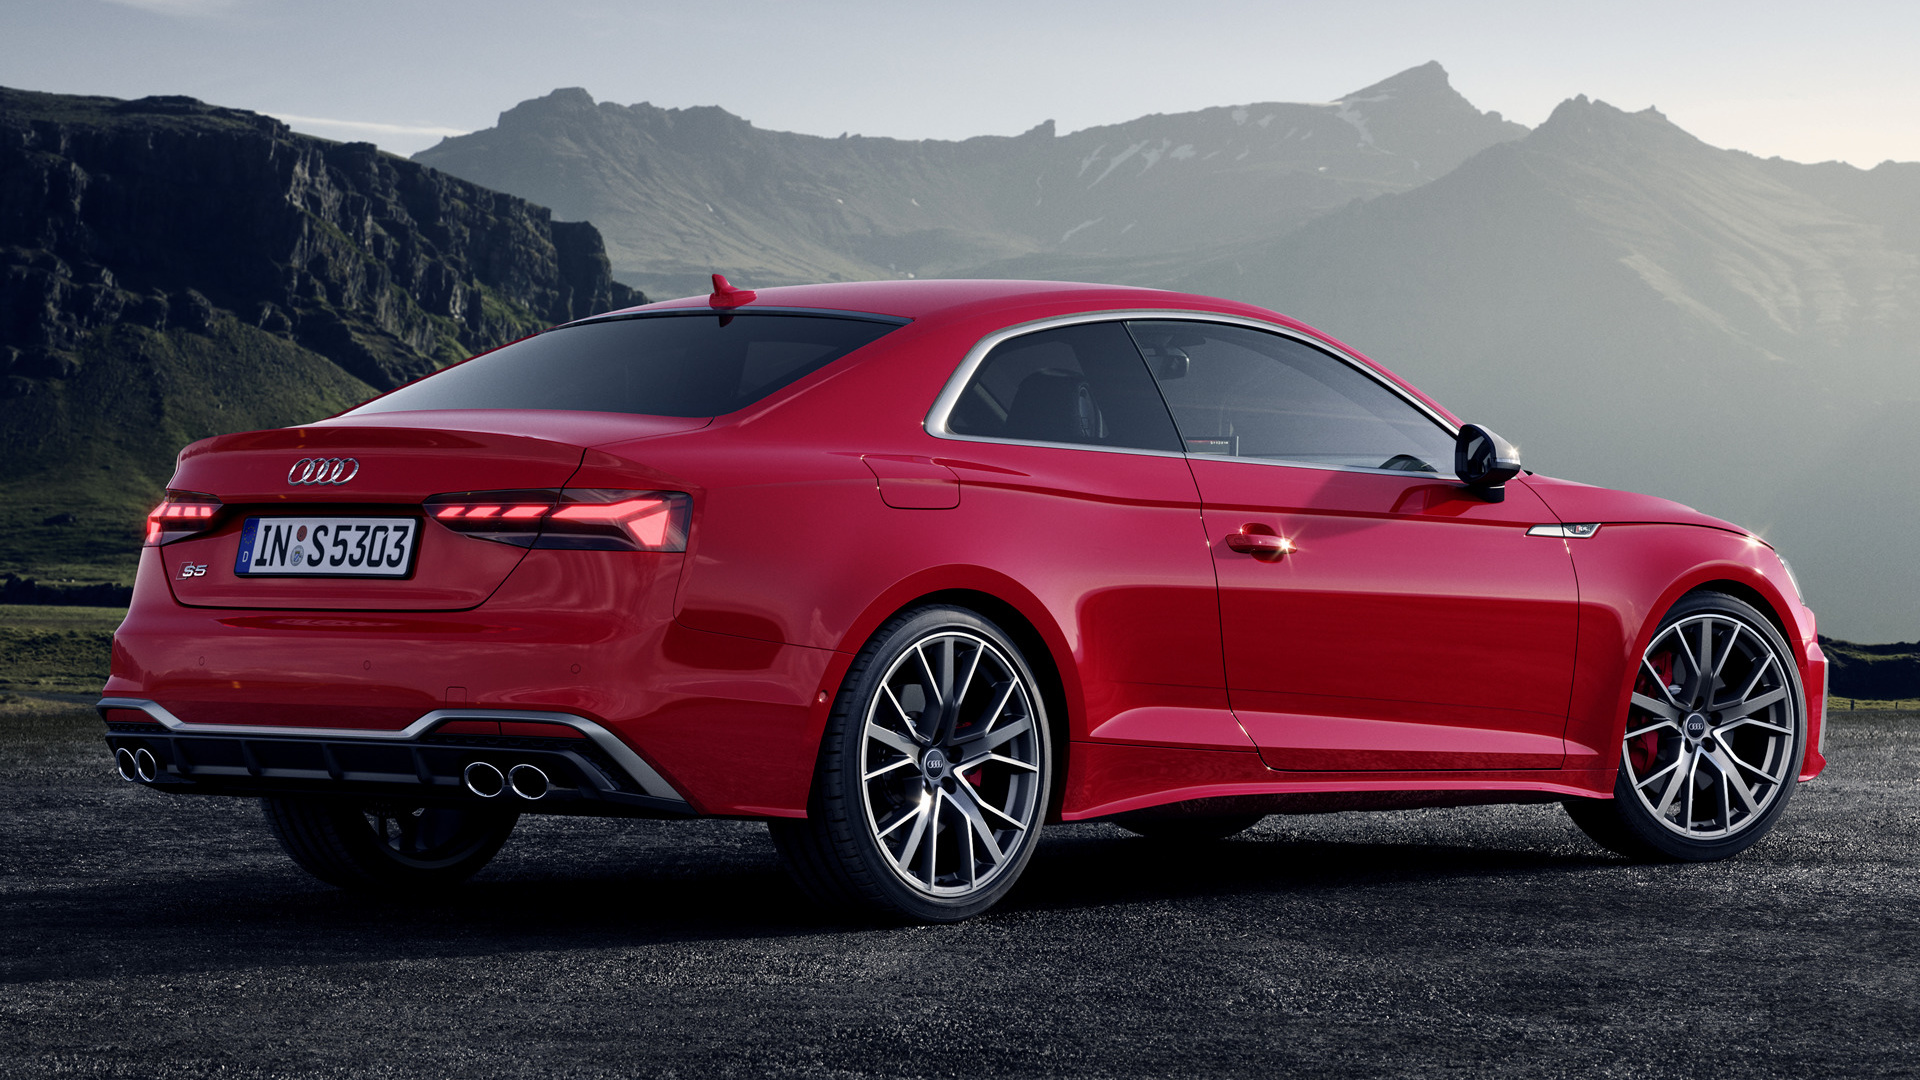 Audi S5 Car Coupe Luxury Car Red Car 1920x1080